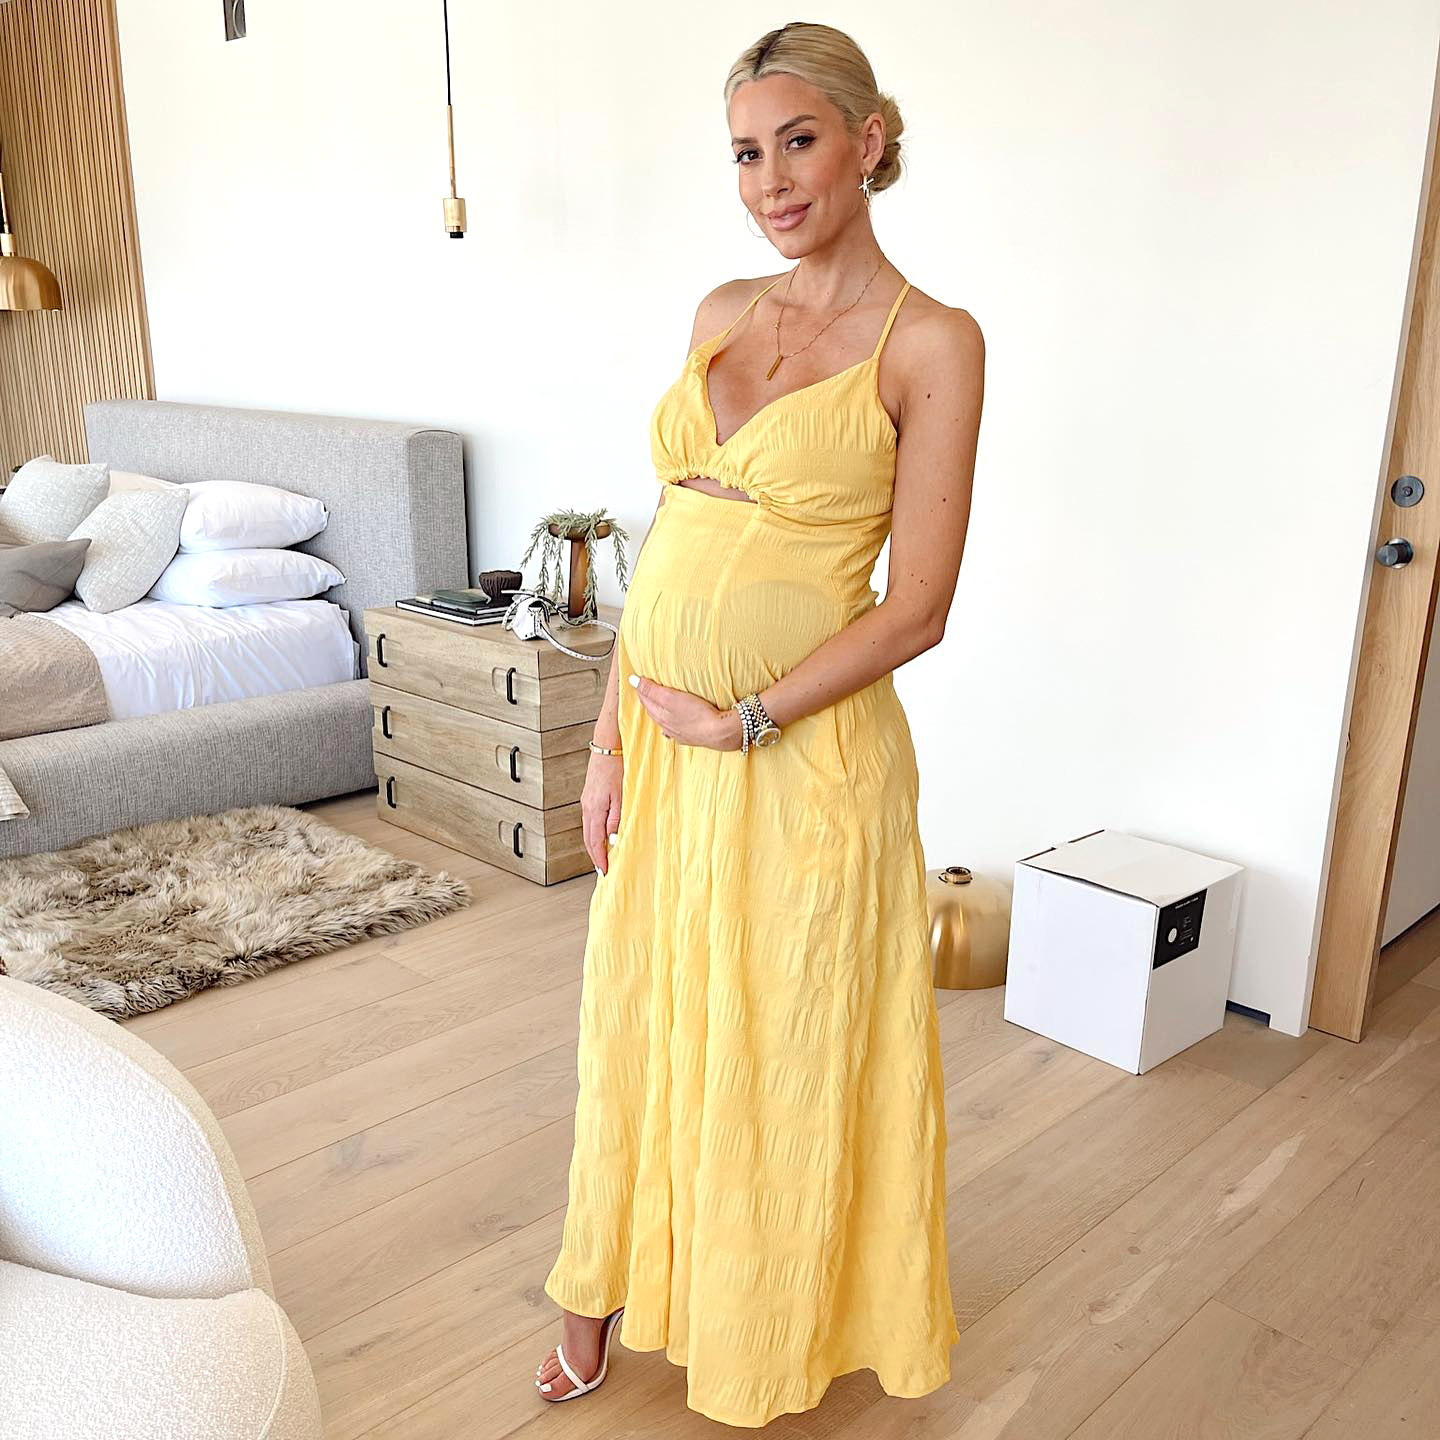 Heather Rae Young Shares Breast-Feeding Photo With Newborn